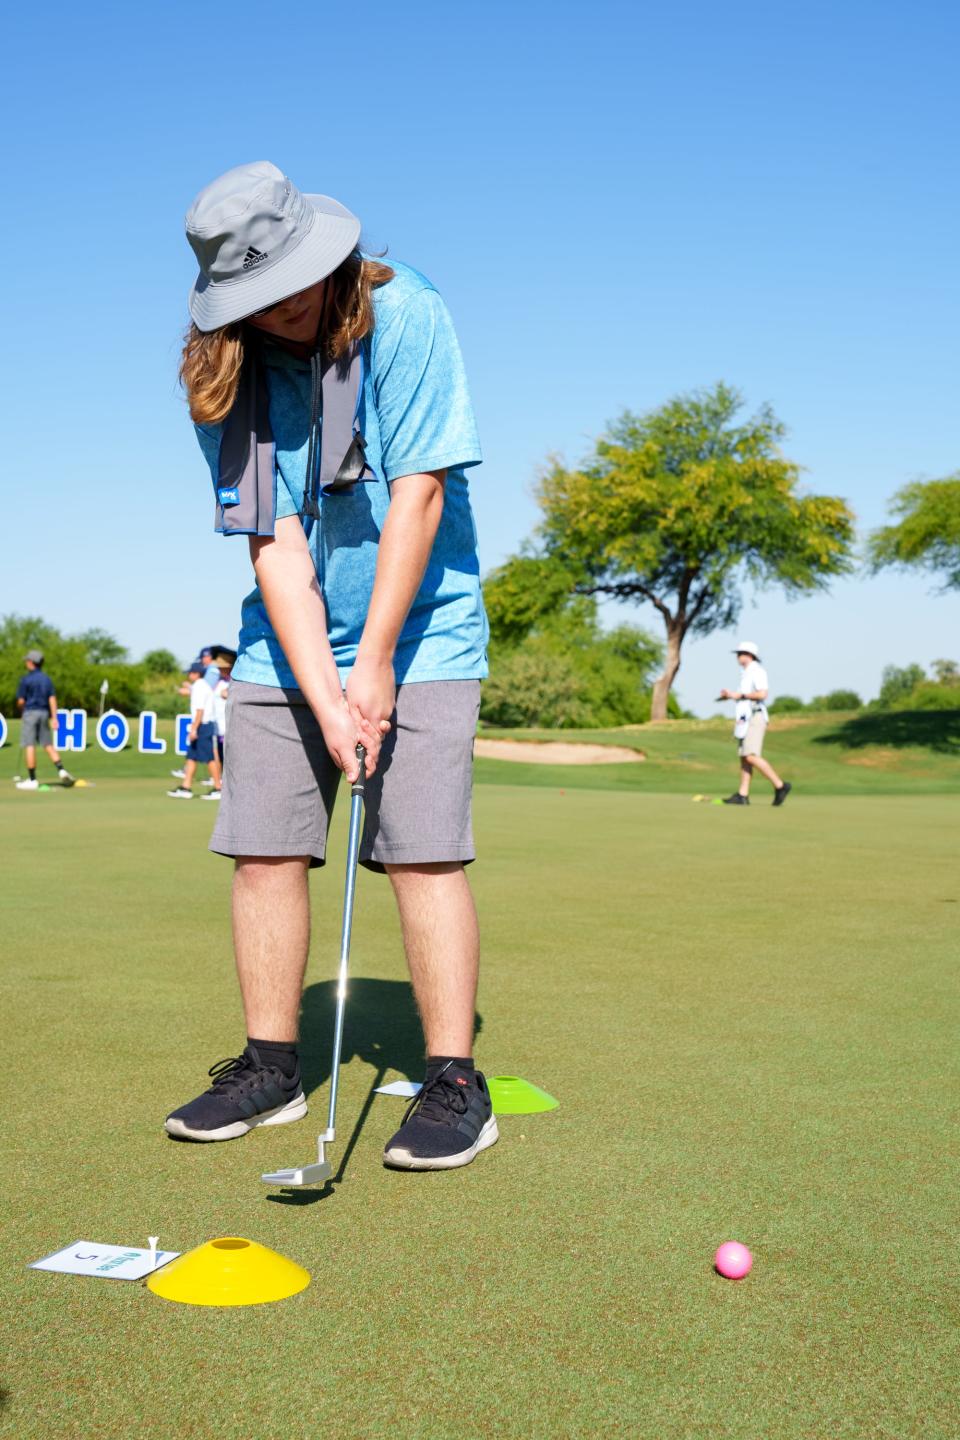 Shane Ishmael, 17, putts at First Tee Phoenix's 100-hole Putt-a-Thon at Legacy Golf Resort on June 11, 2022, in Phoenix, AZ.